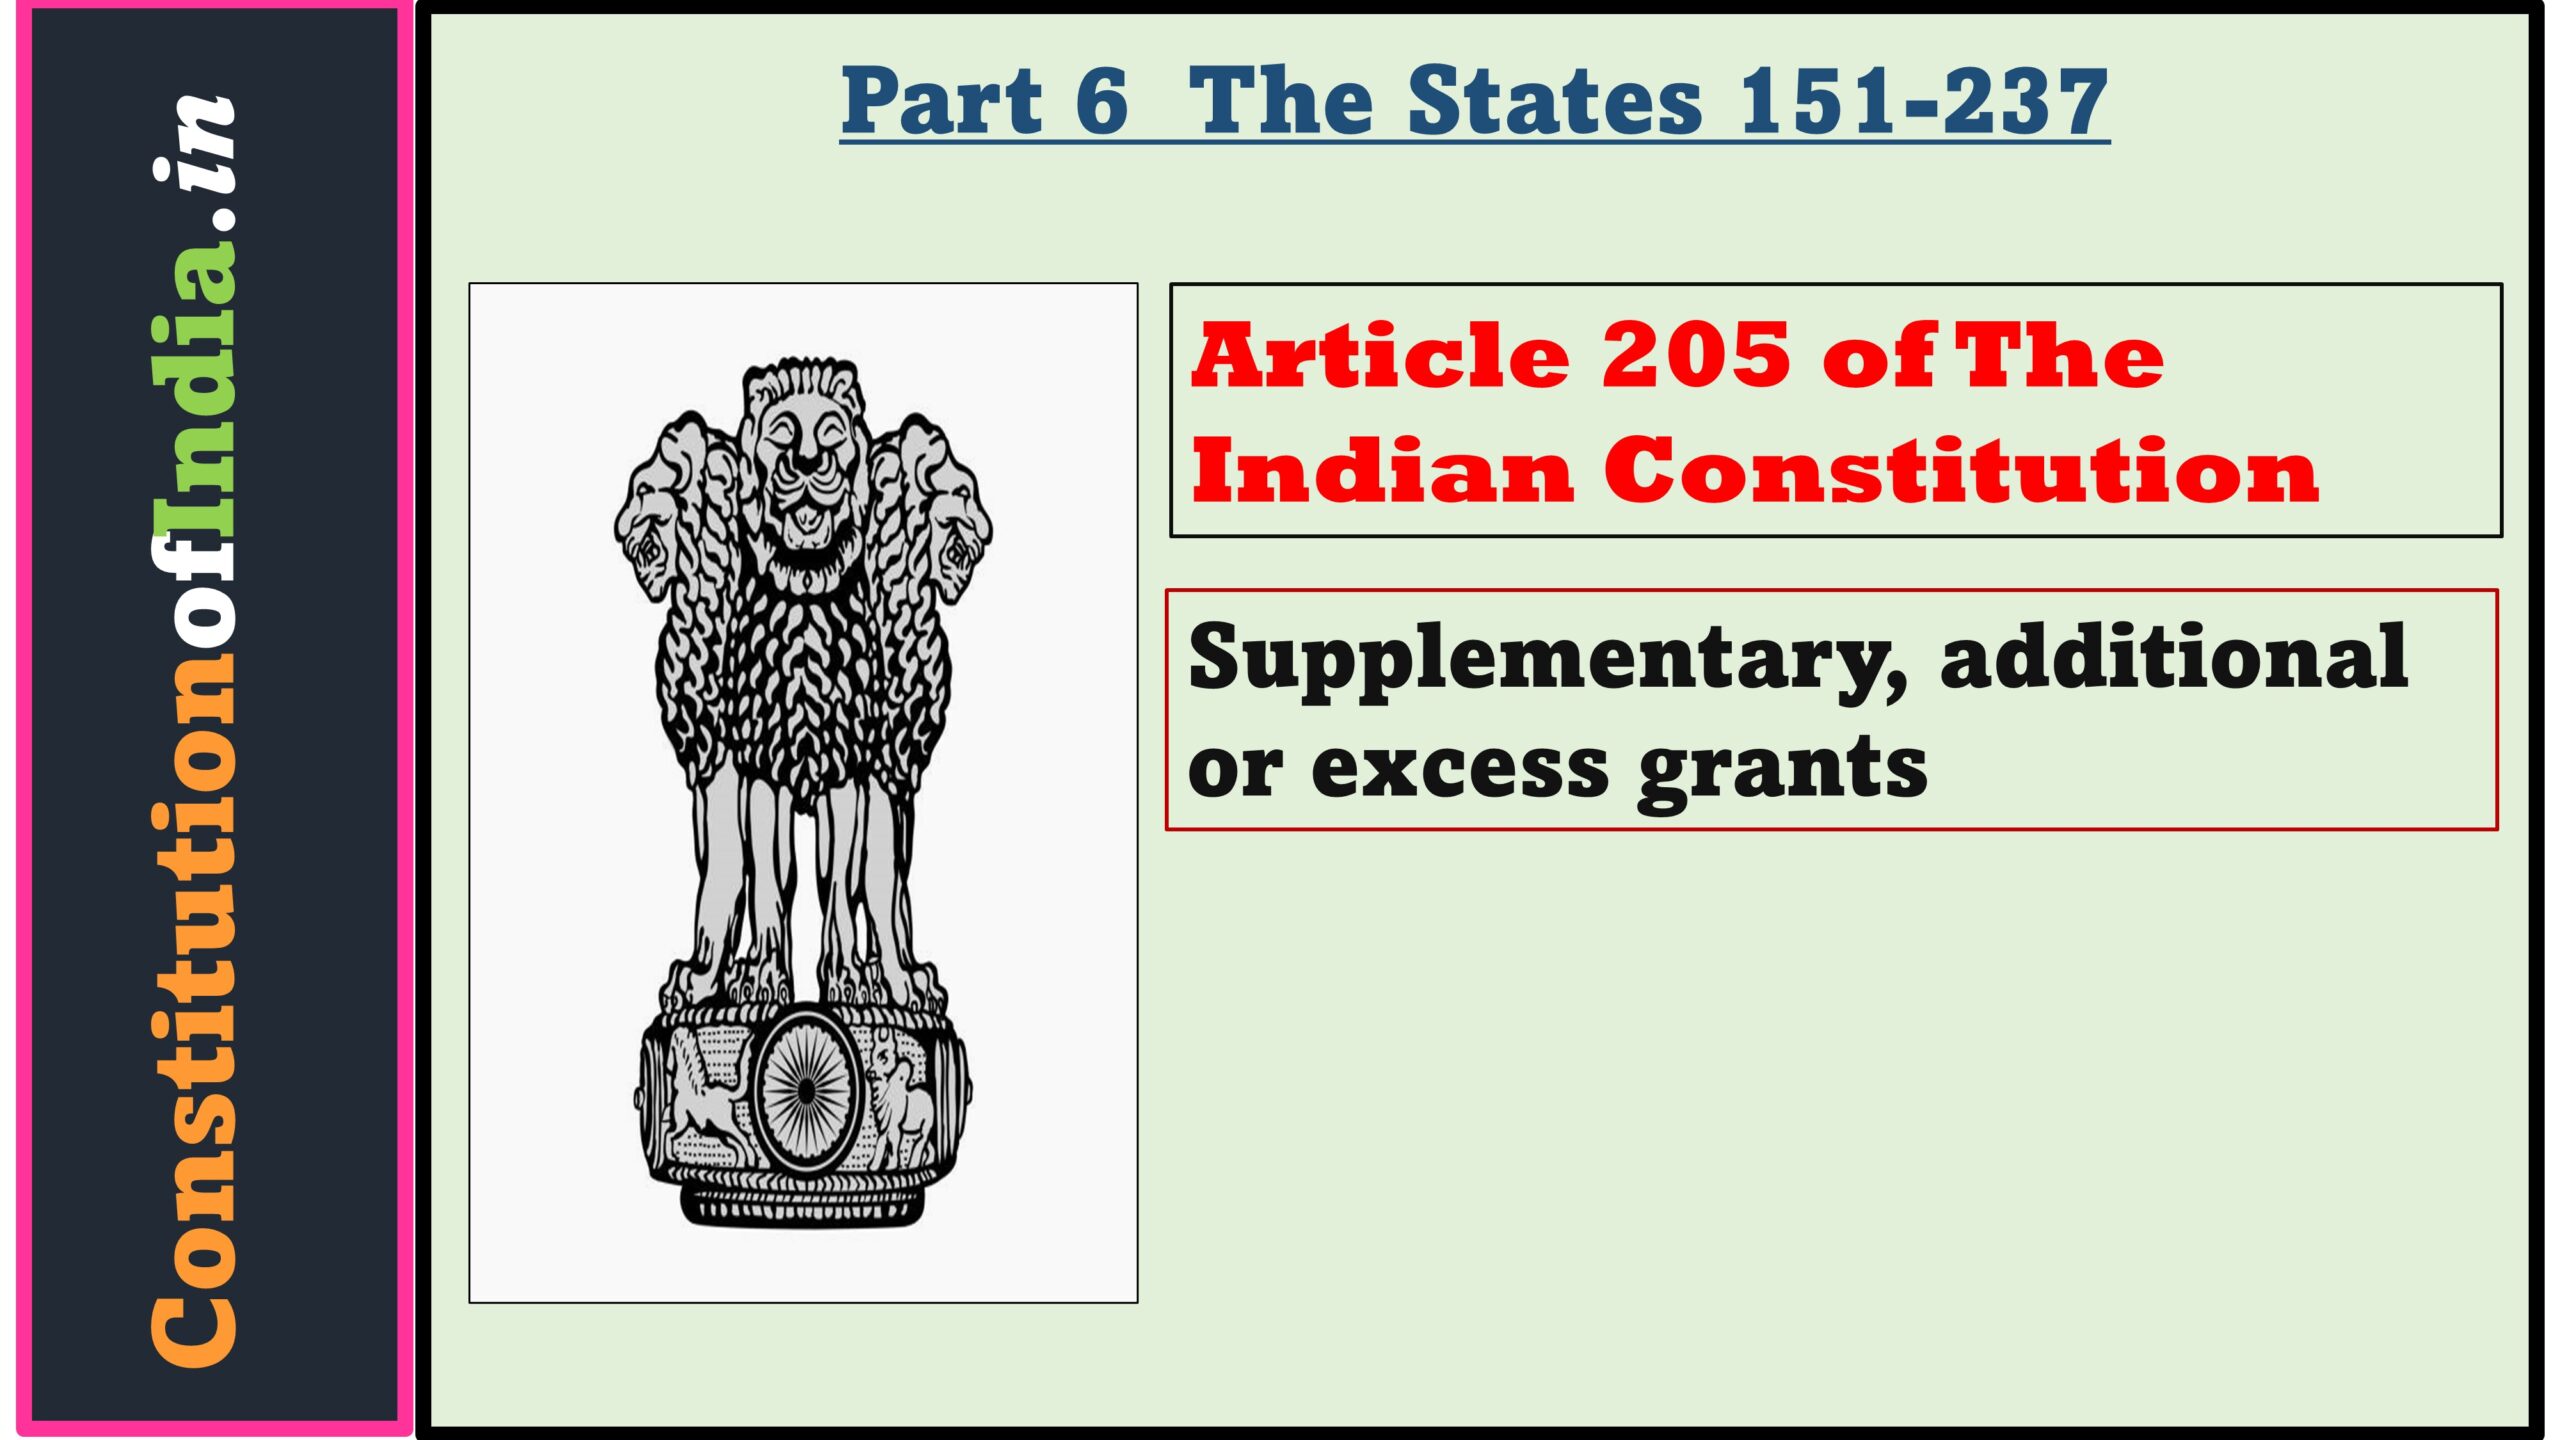 Article 205 of The Indian Constitution